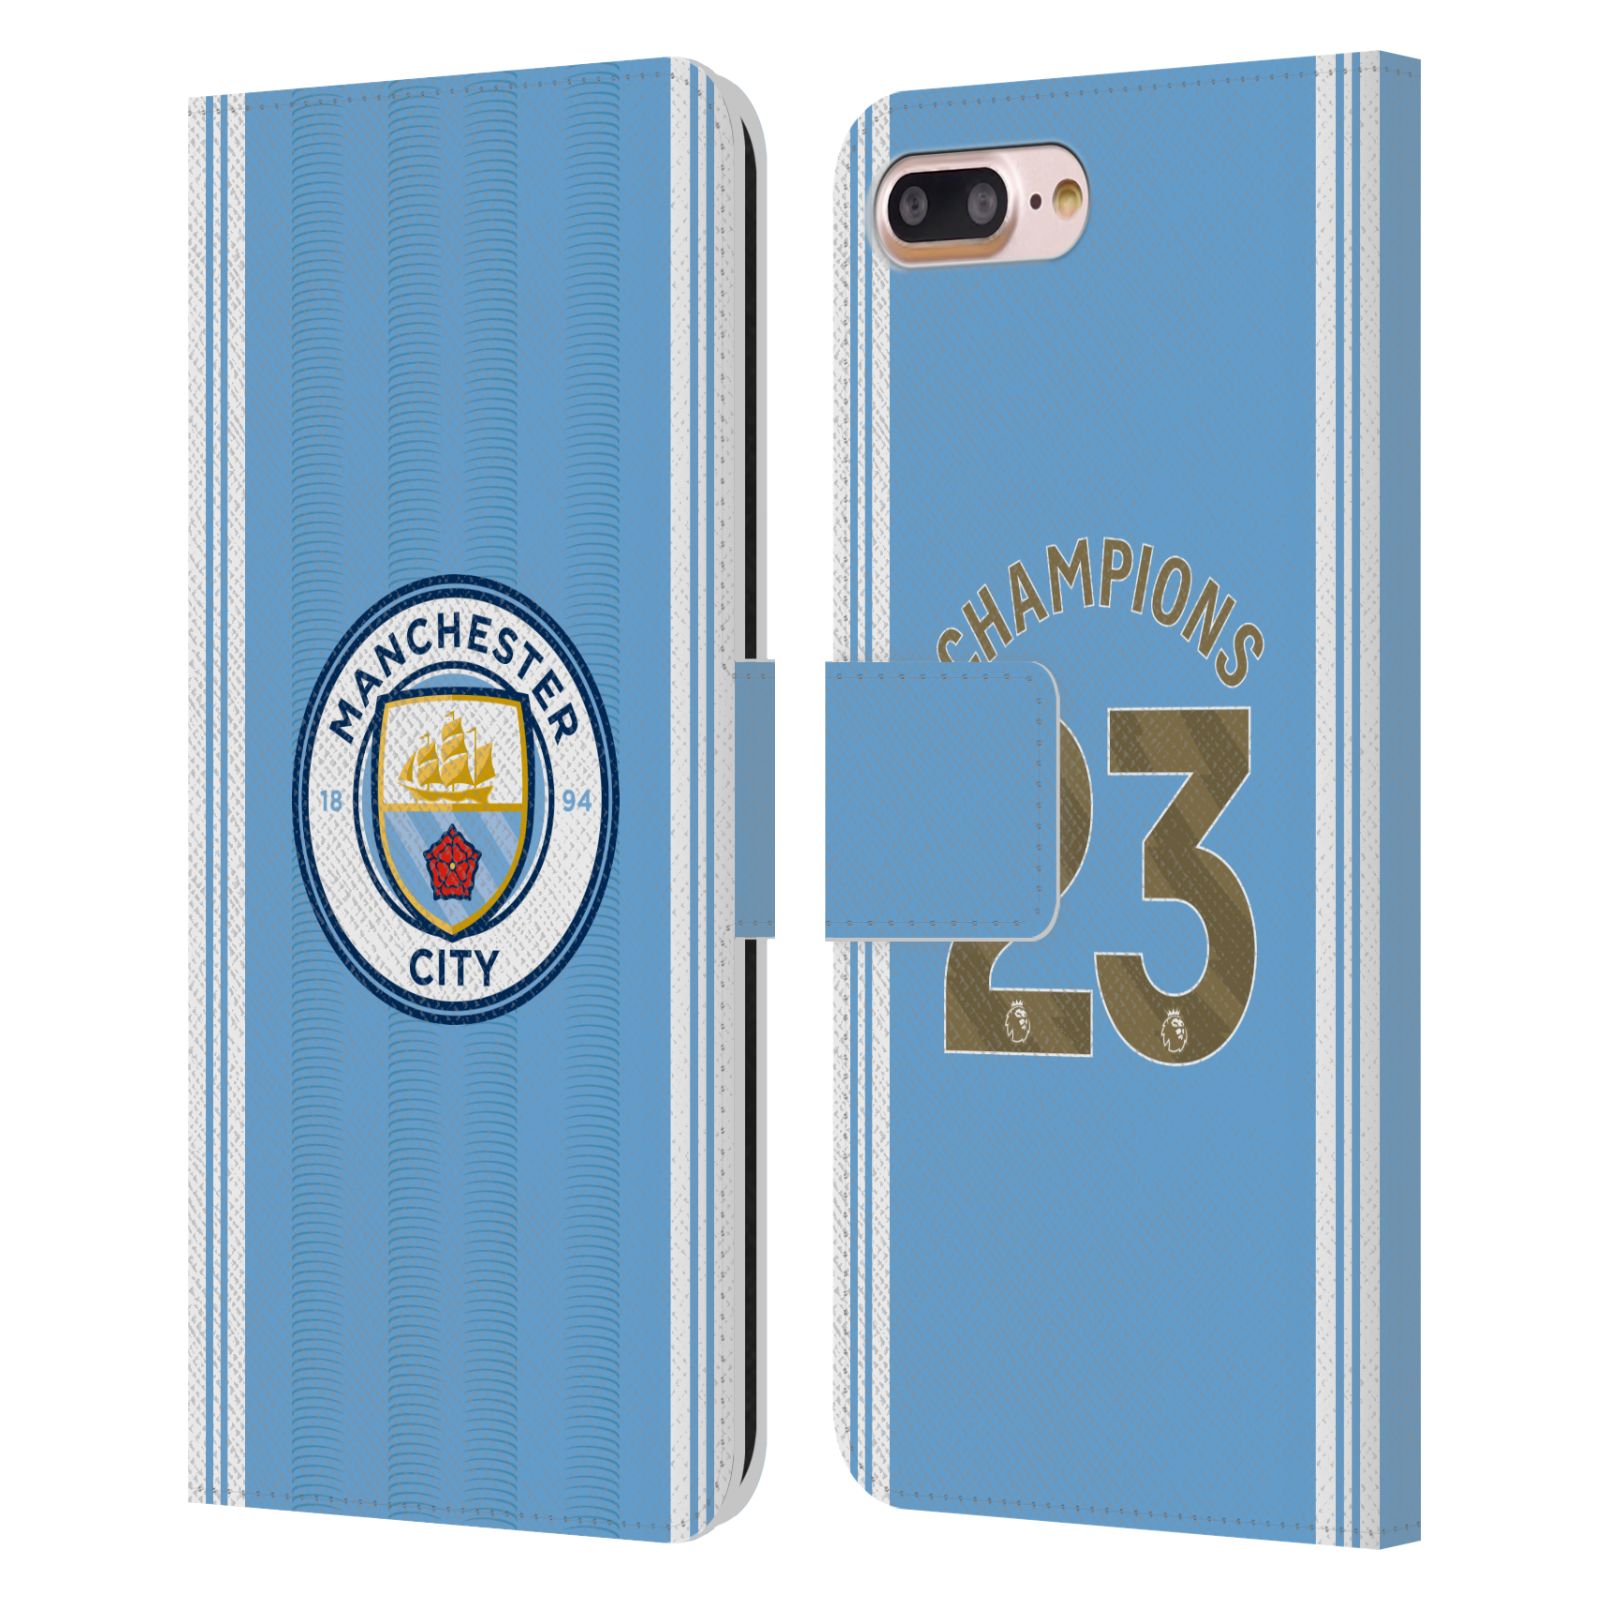 Pouzdro na mobil Apple Iphone 7+/8+ - HEAD CASE - Manchester City - Champions dres 2